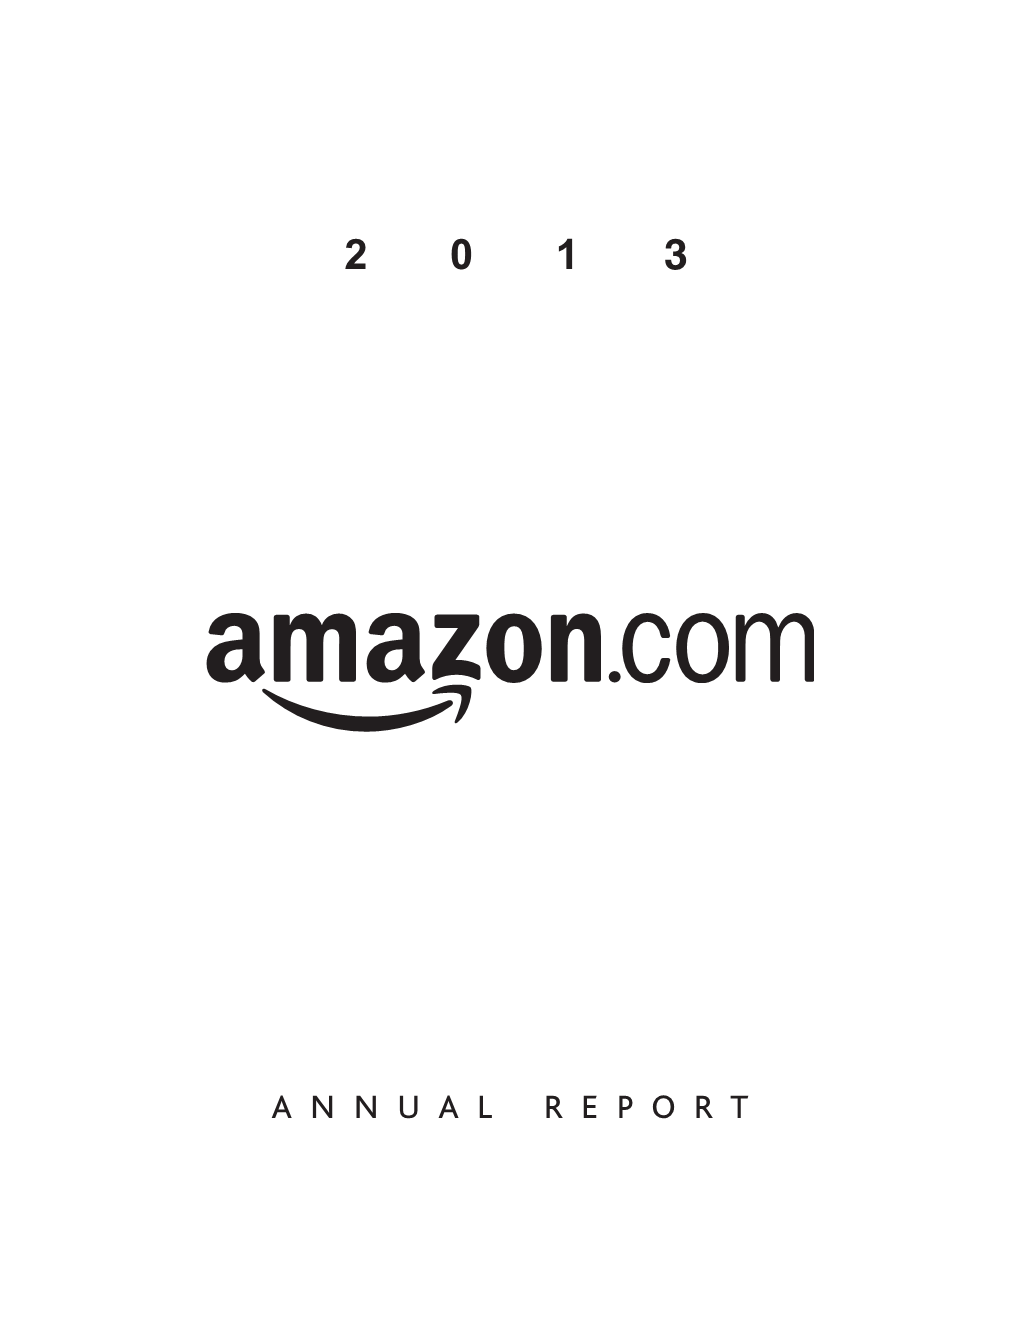 Amazon.Com, Inc. April 2014 1997 LETTER to SHAREHOLDERS (Reprinted from the 1997 Annual Report)